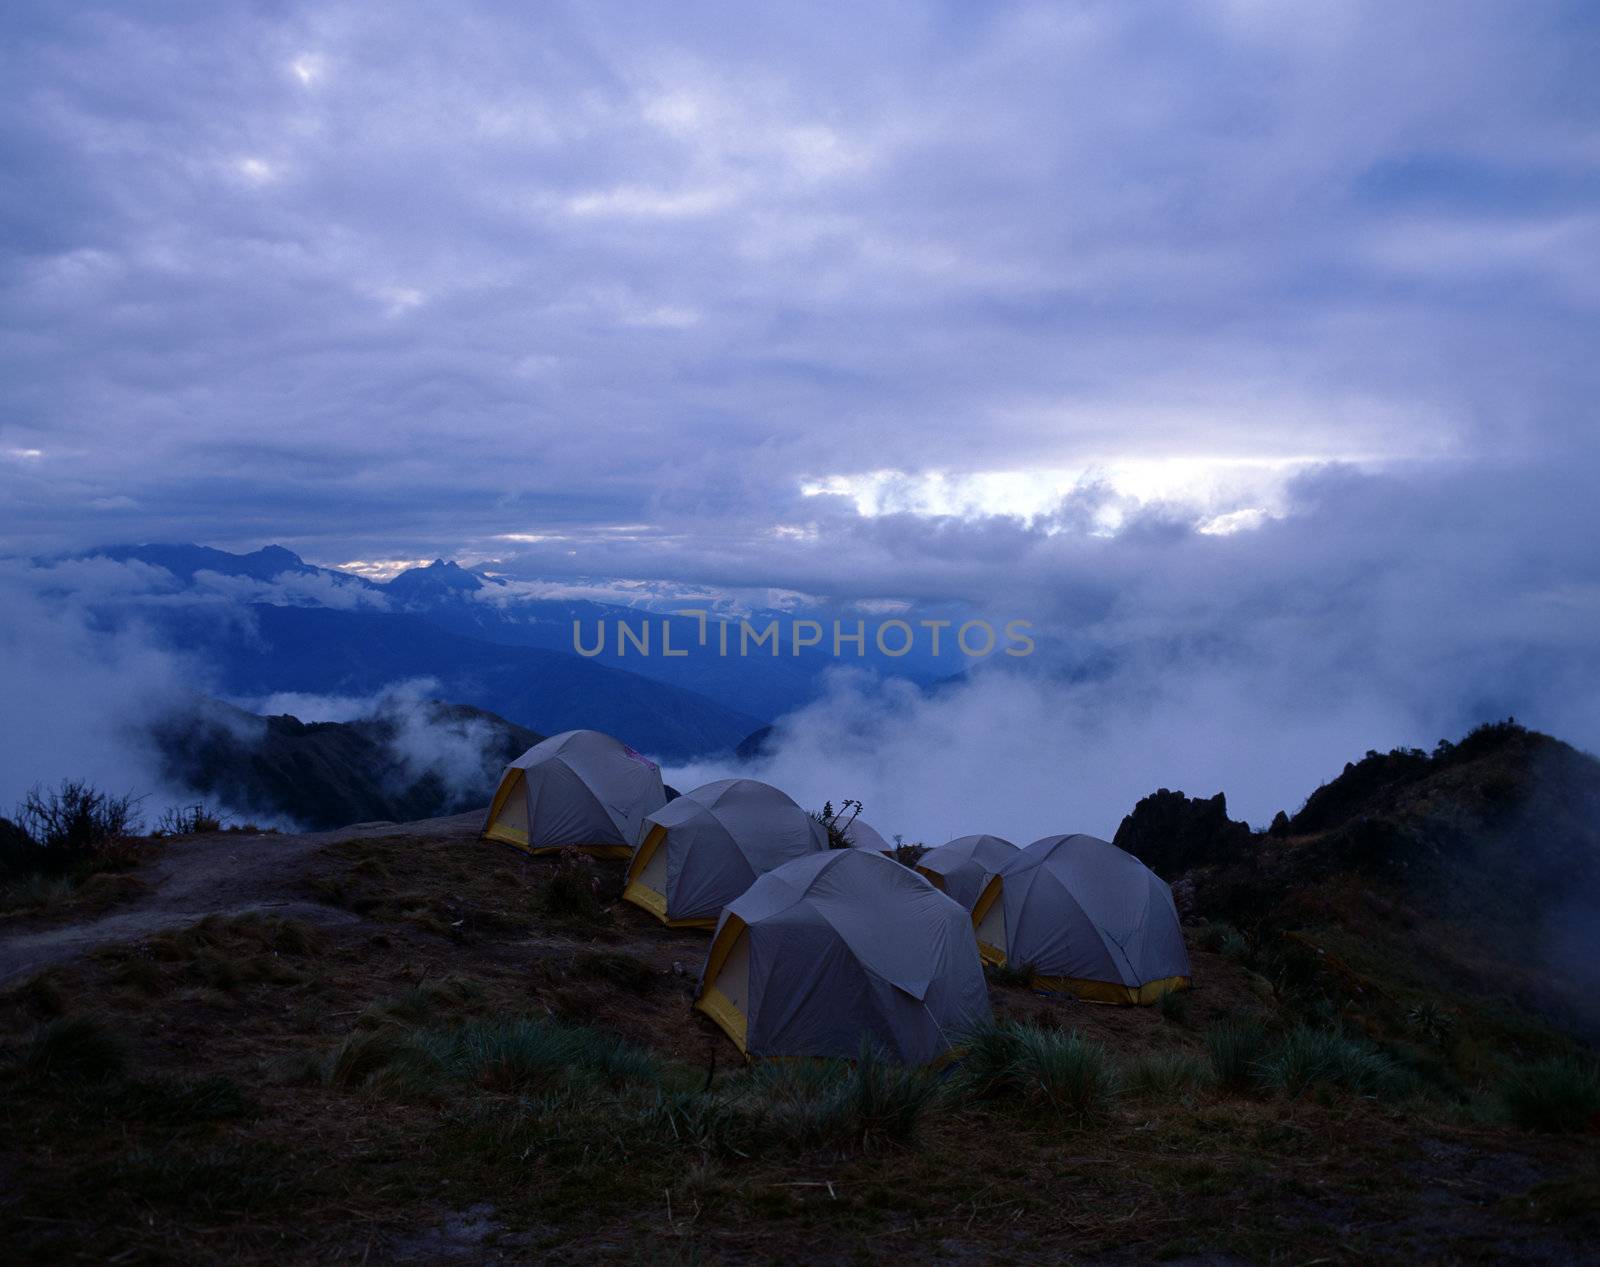 Overnight campsite of small tents on the mountainside, Peru.